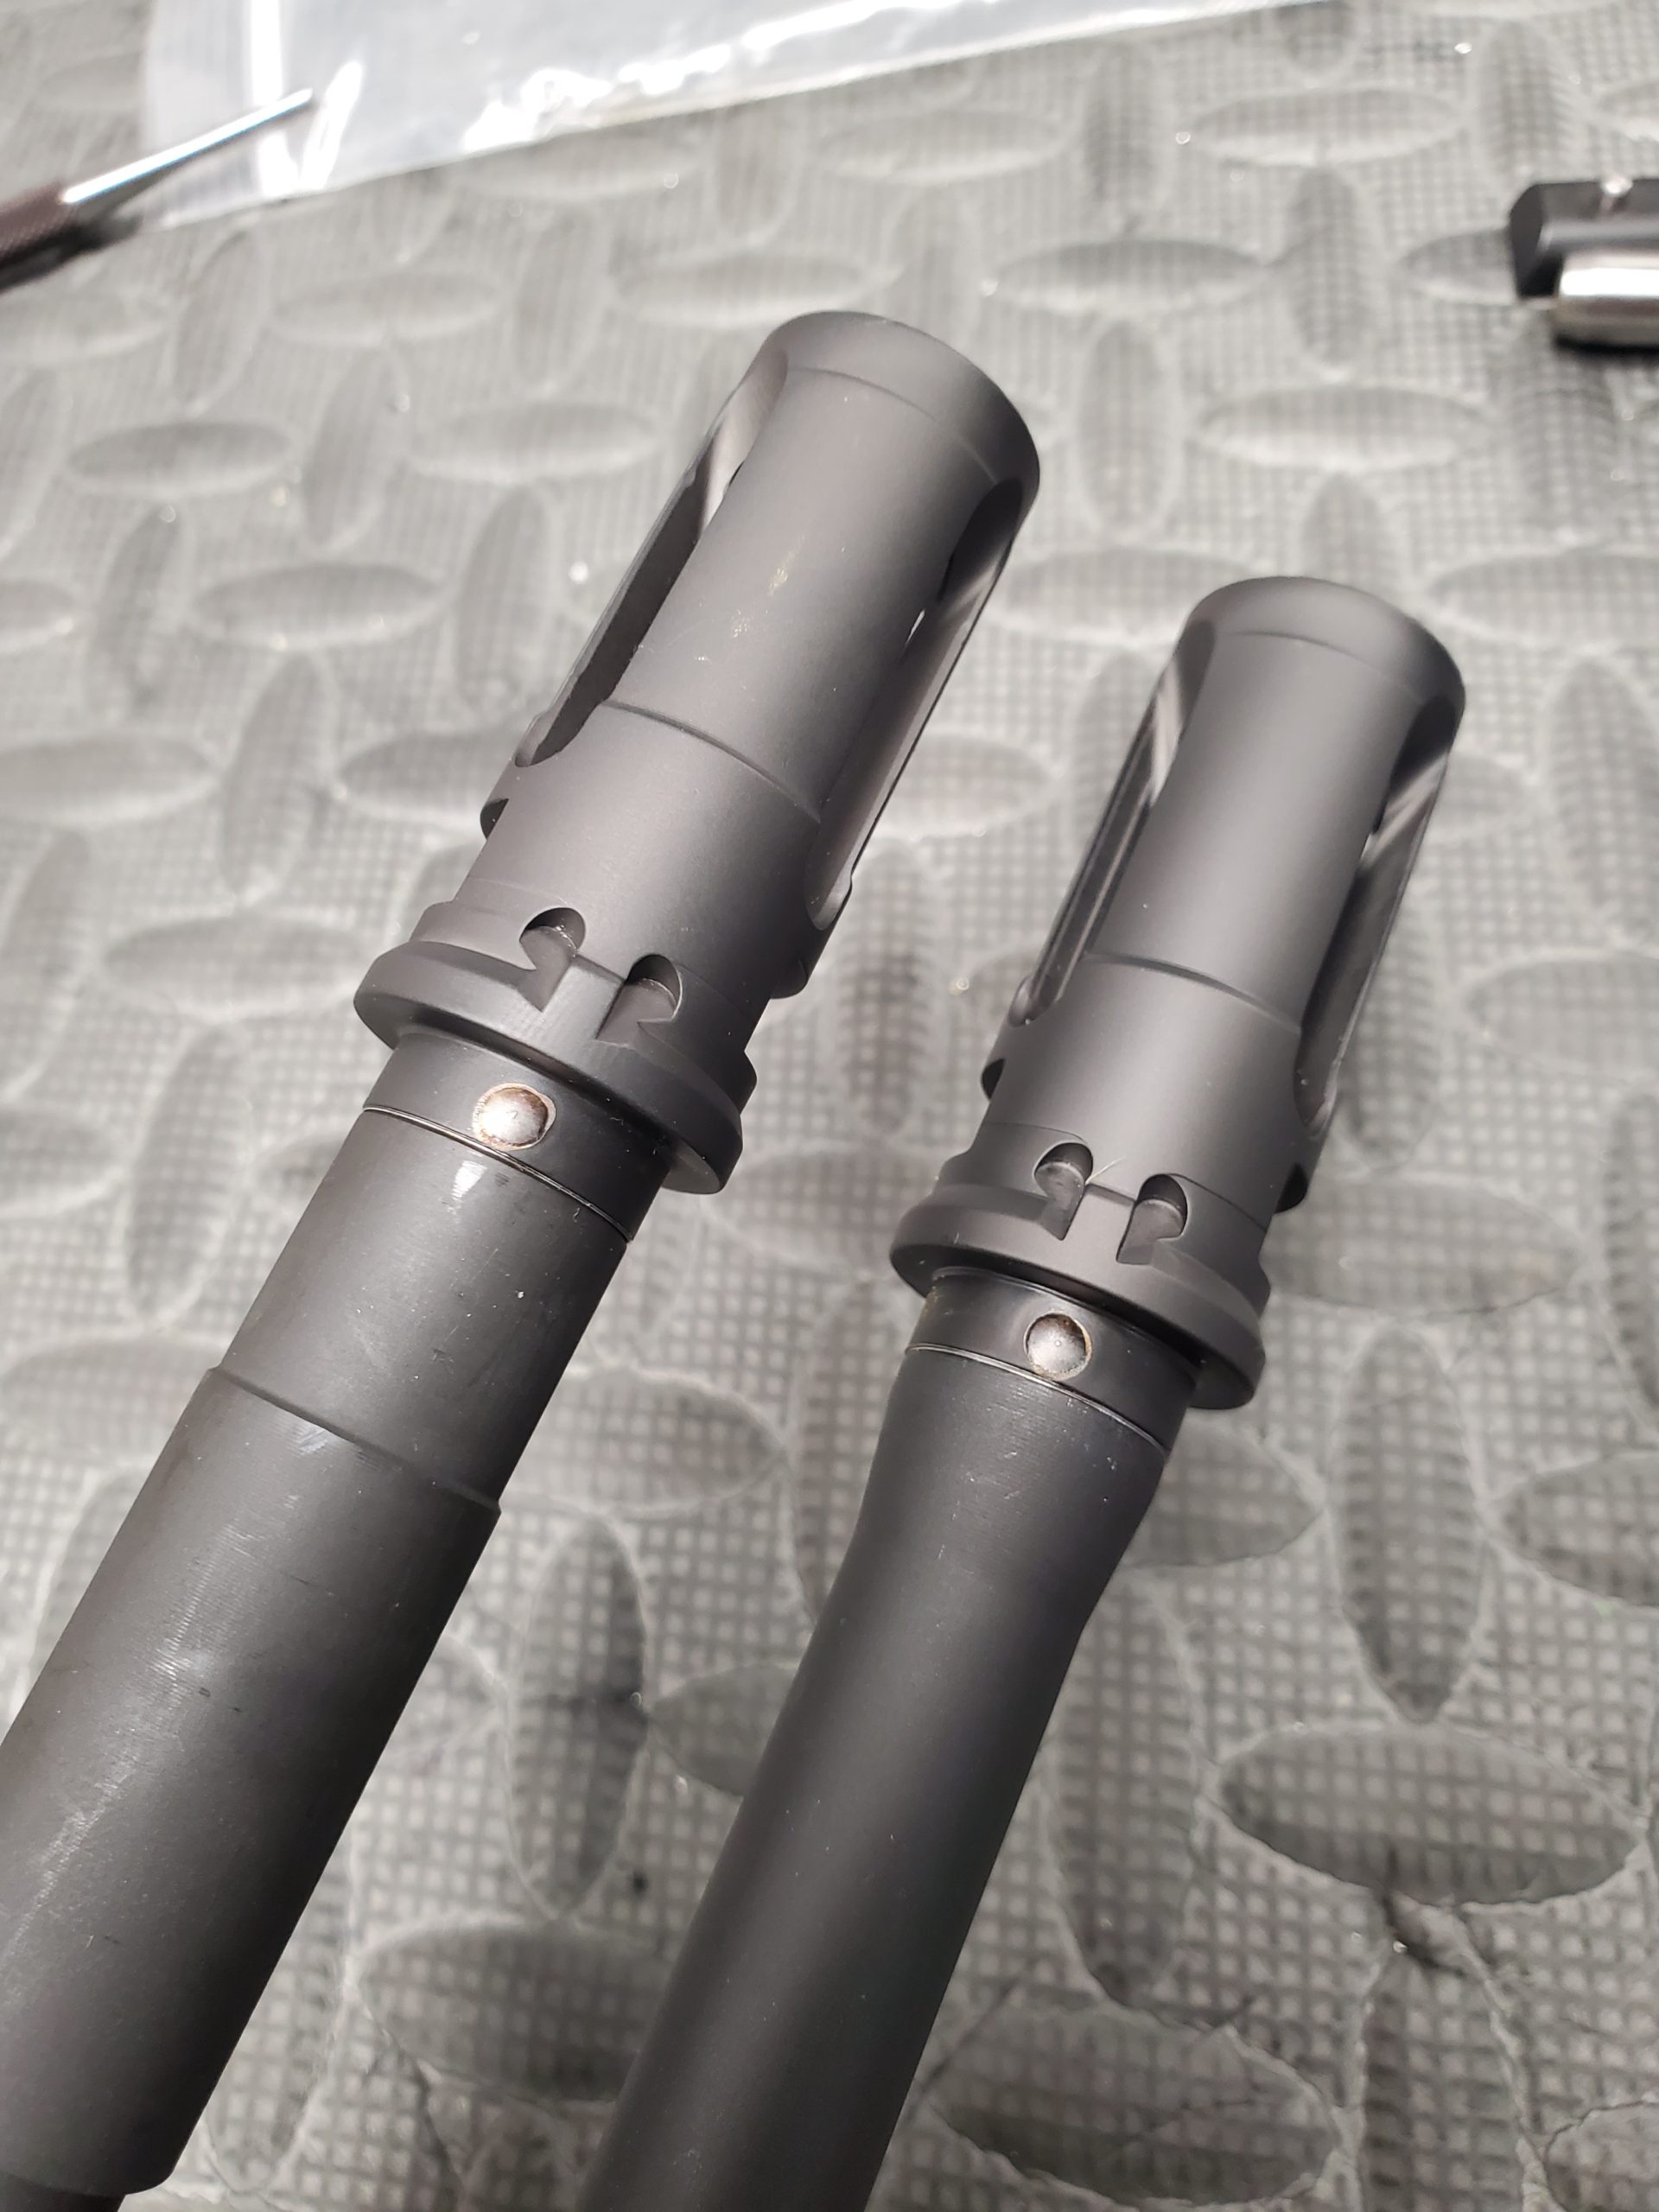 Pin and Weld Surefire closed tine flash hider by Trajectory Arms